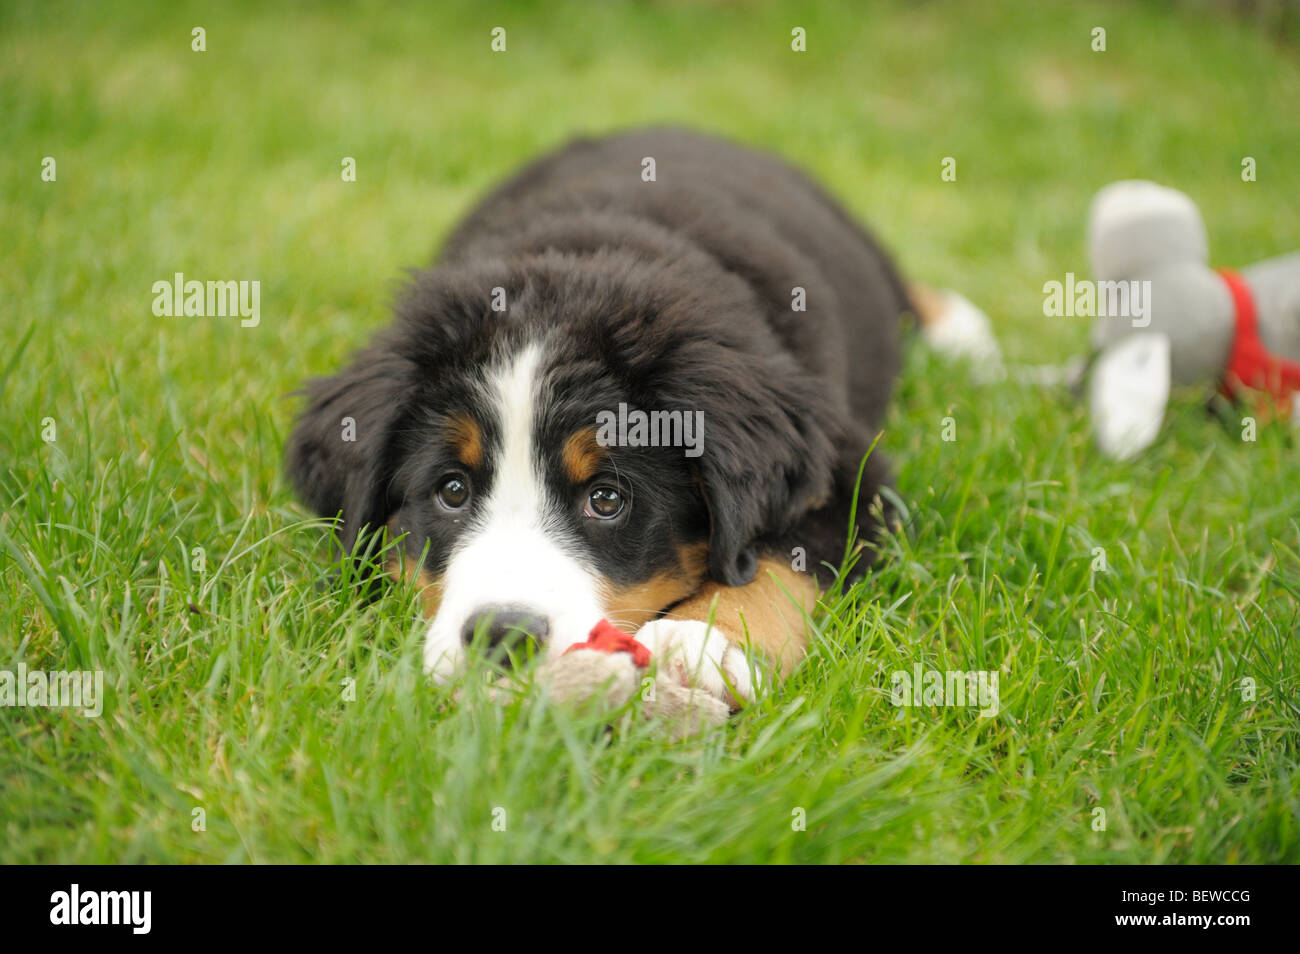 Bernese mountain dog puppy lying on a meadow, close-up Stock Photo